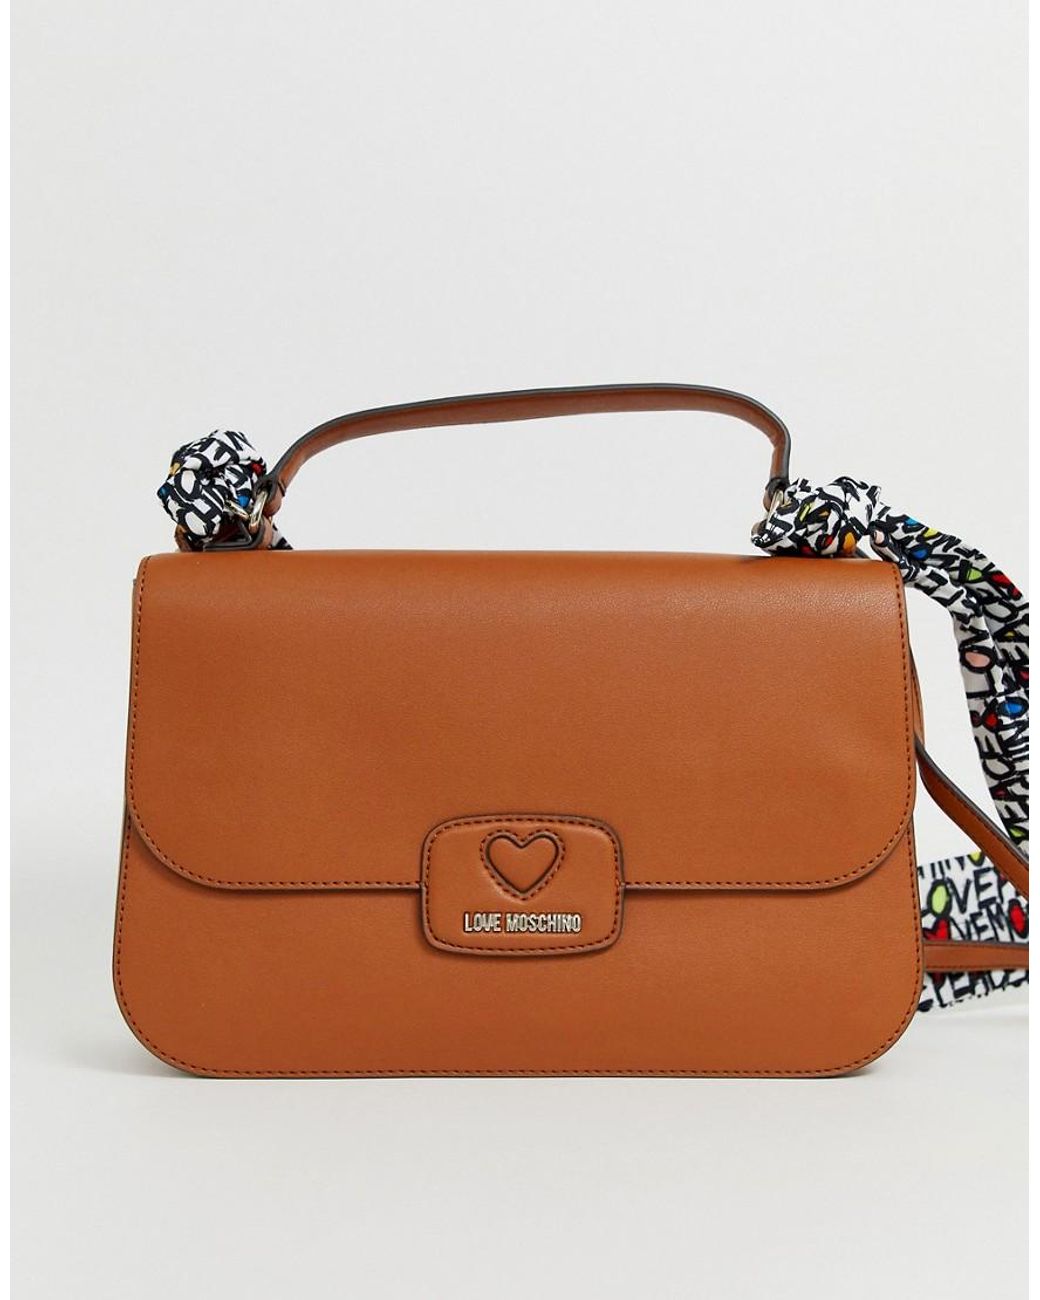 love moschino bags house of fraser